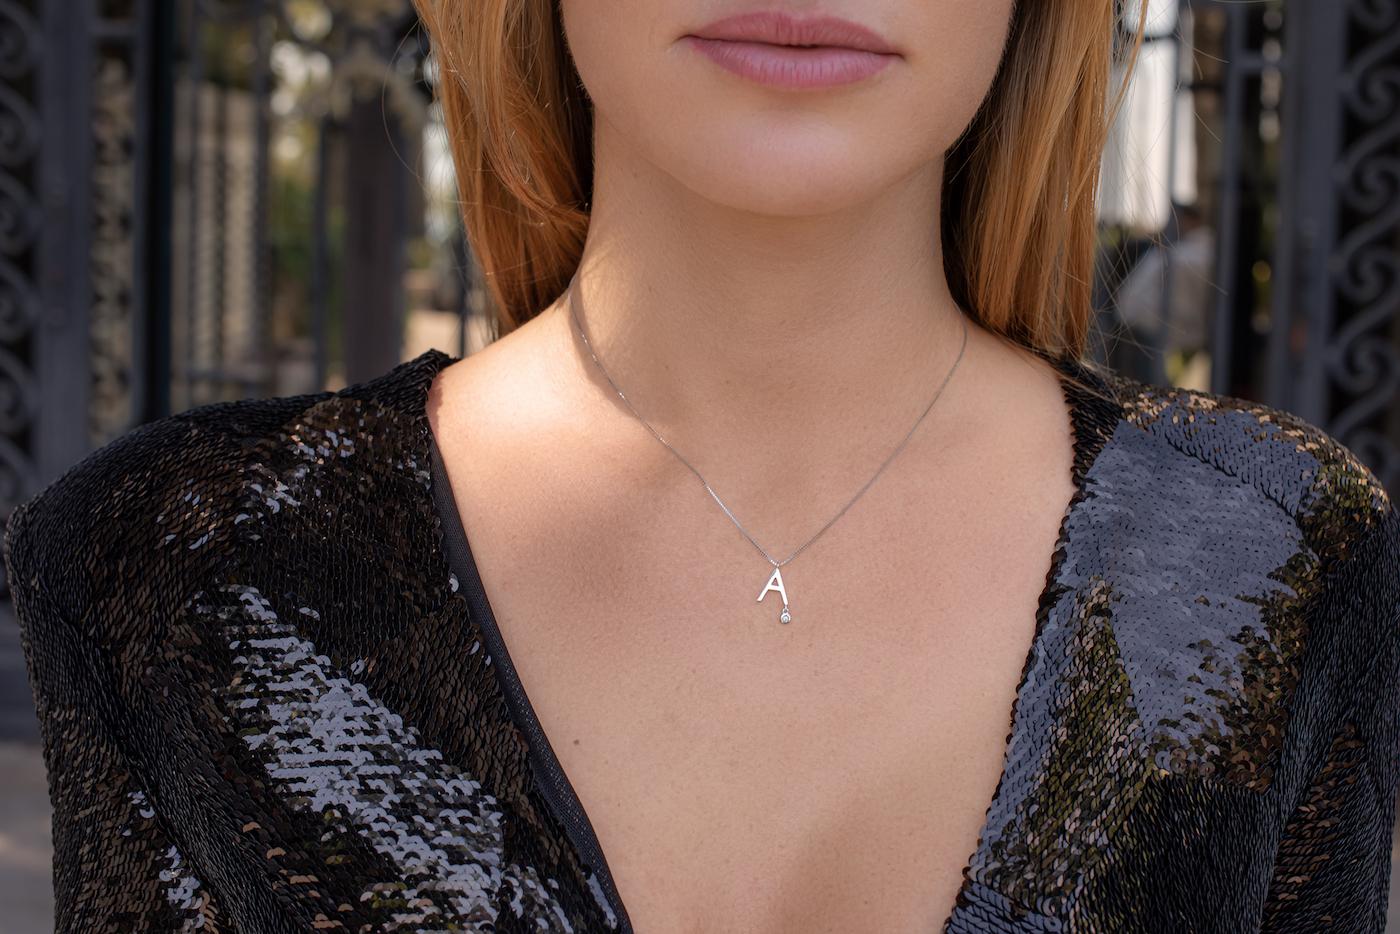 LETTER A model, necklace in solid 18K white gold adorned with 1 round brilliant synthetic diamond of 0.01 carat.

• Venetian mesh, spring ring clasp.

• Carats: 0.01 ct total

• Color: DEF

• Clarity: VS

• Venetian mesh, spring ring clasp.

• 1.60